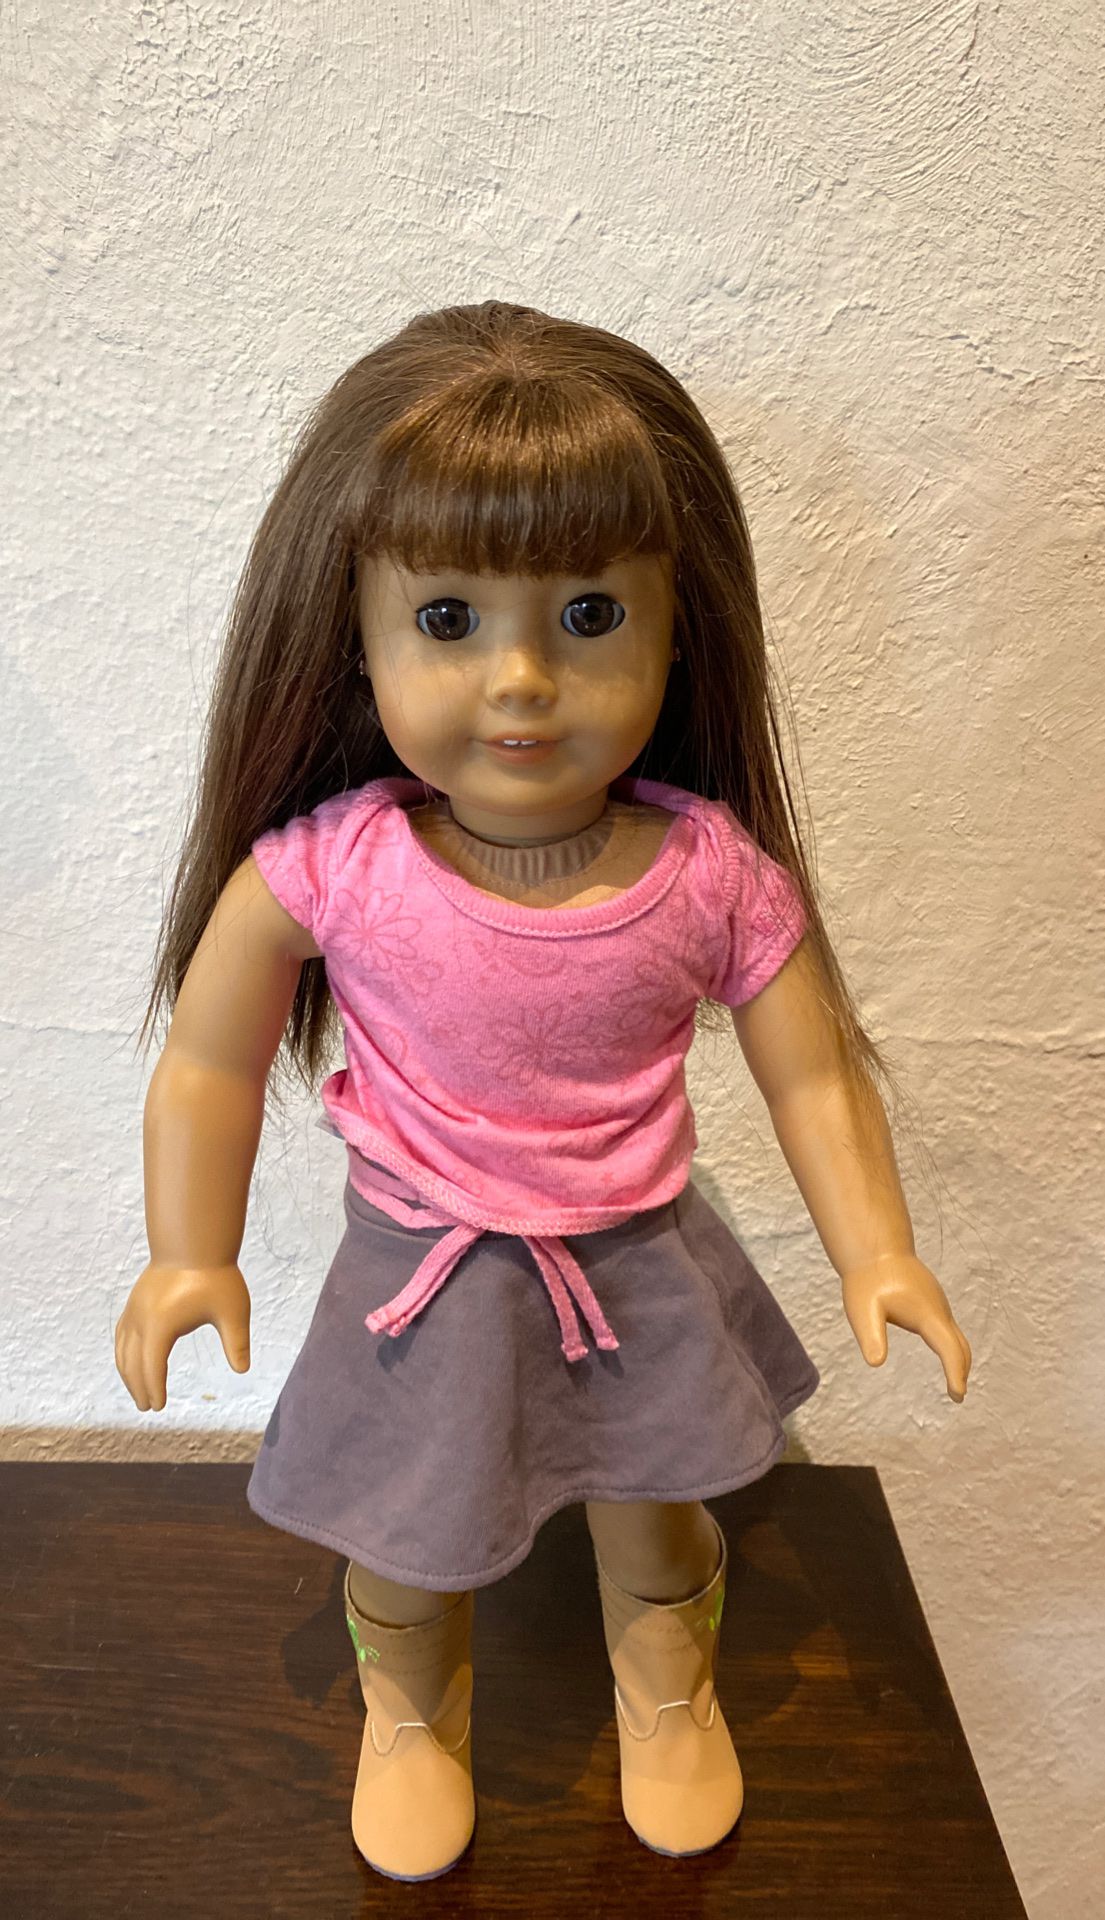 American girl doll in excellent condition